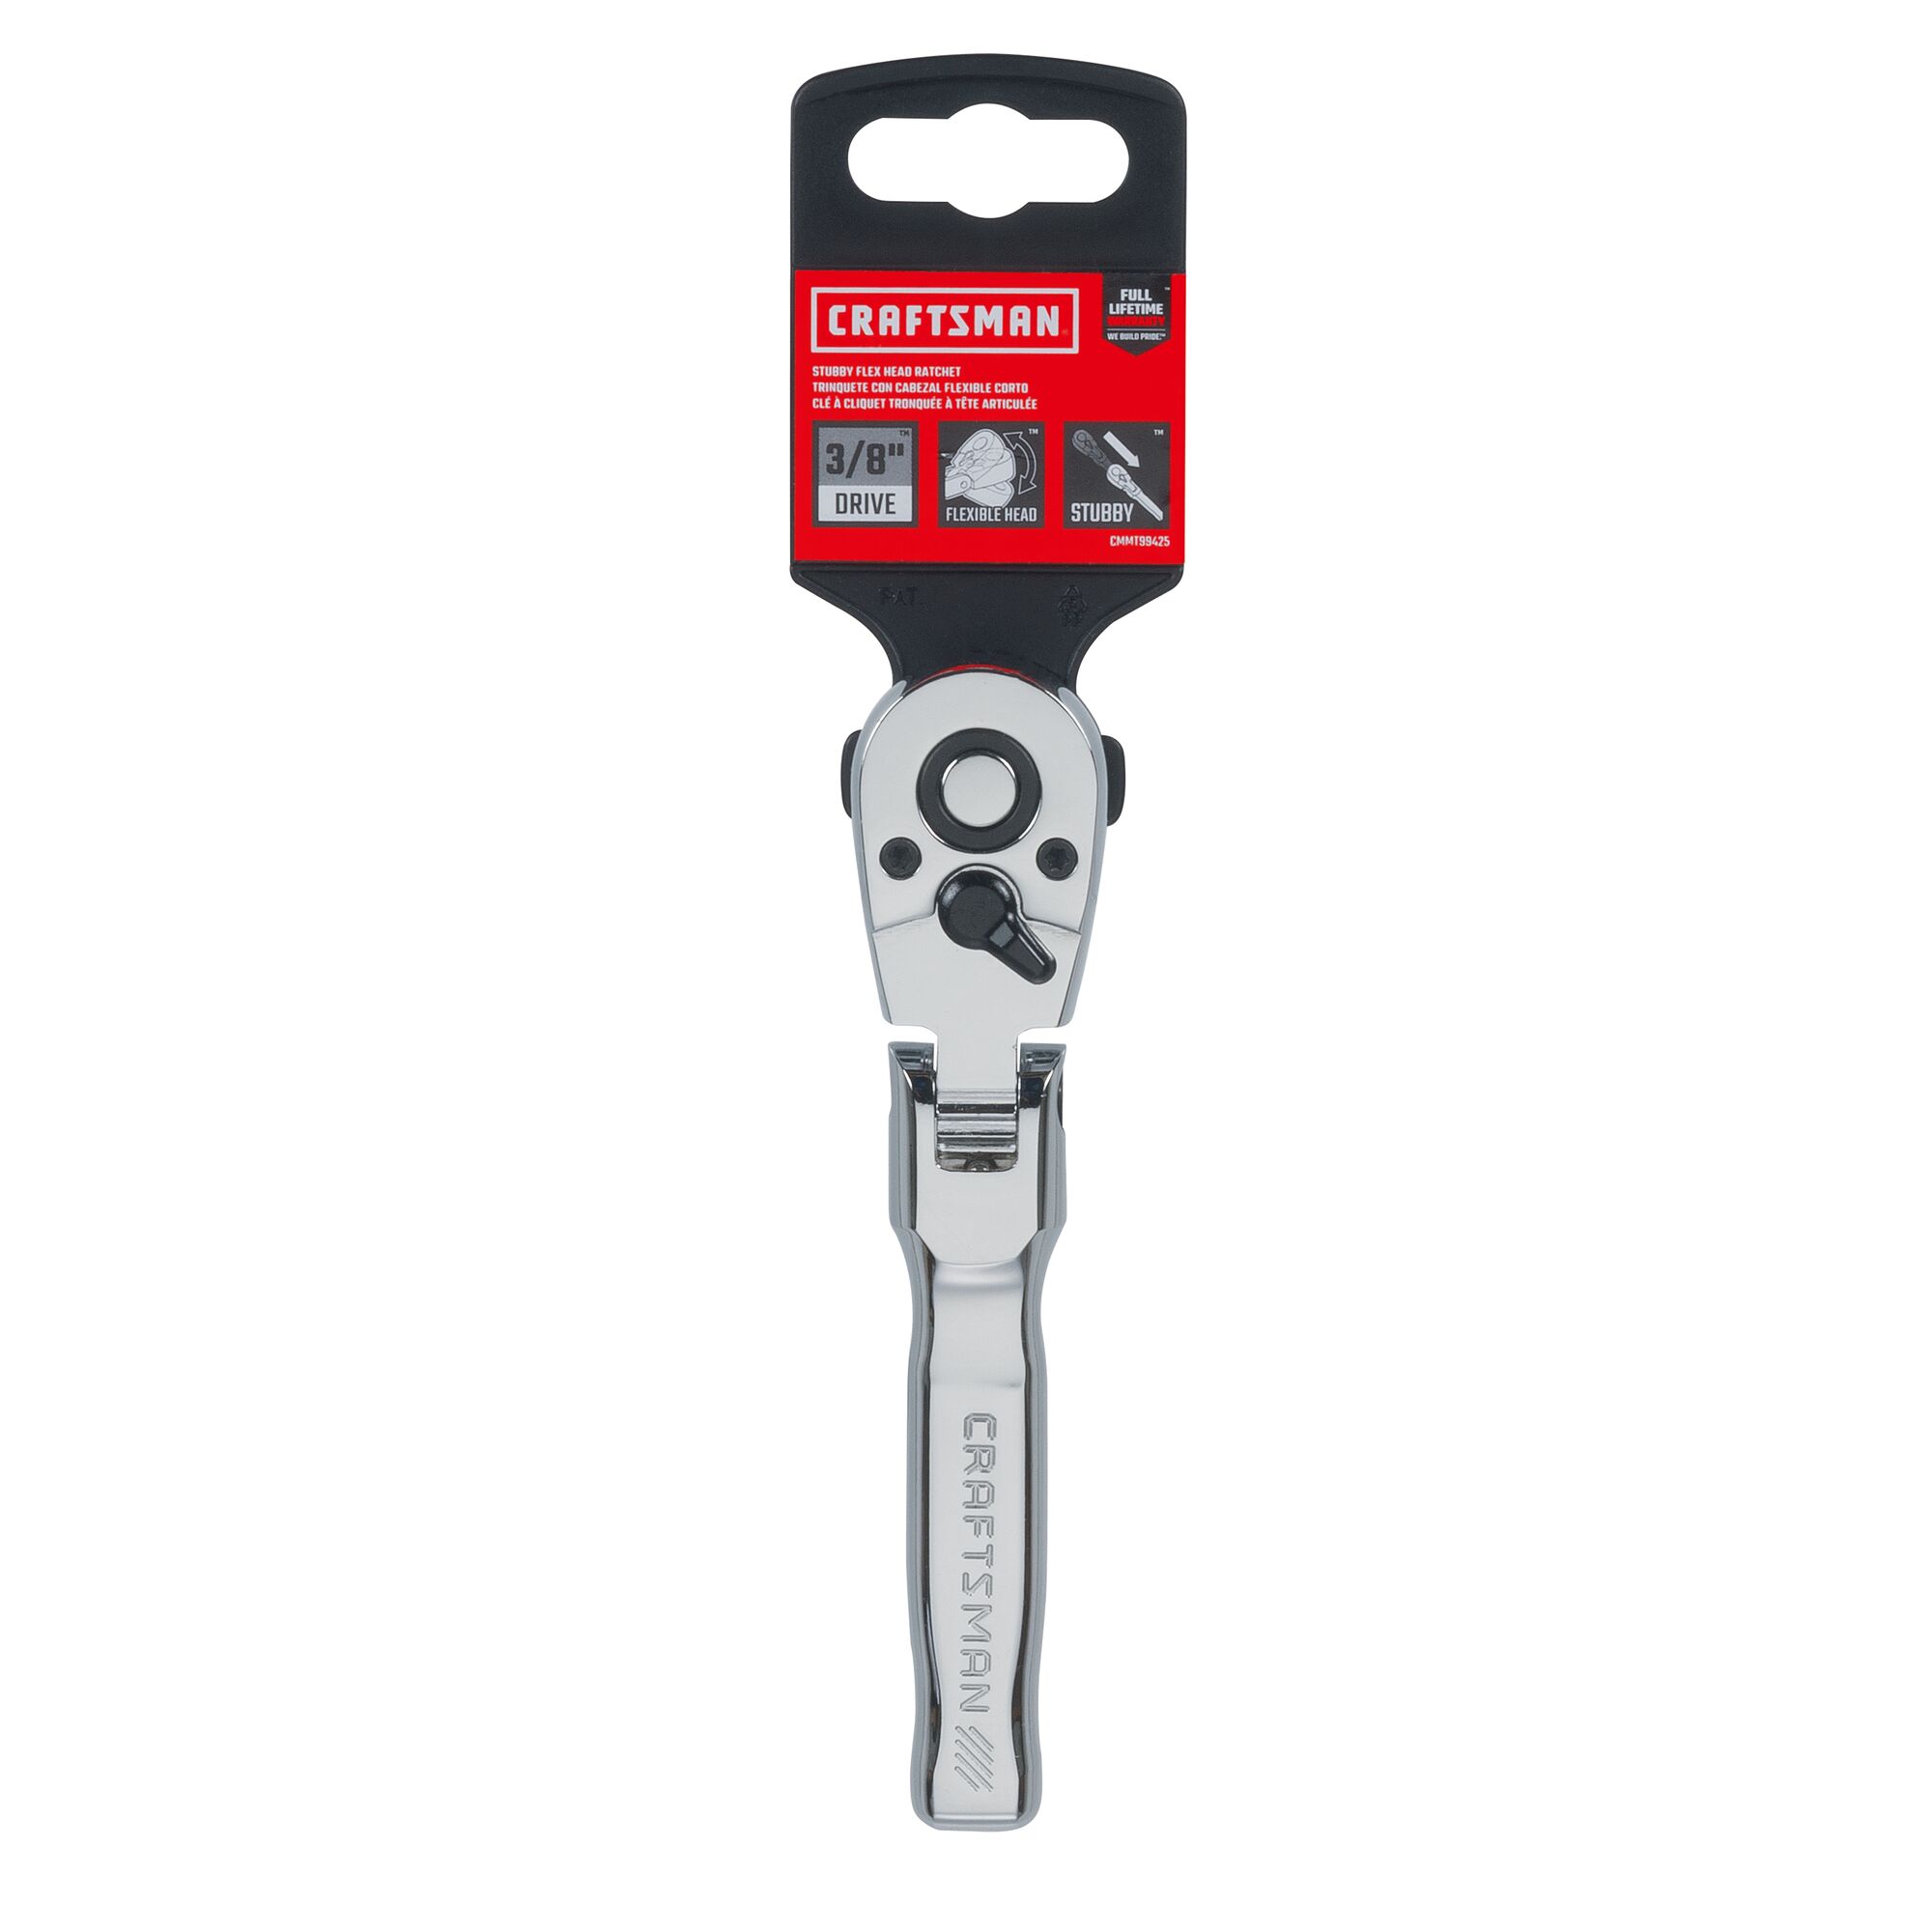 72 tooth 3 eighths inch drive quick release flexible head standard ratchet in plastic packaging.